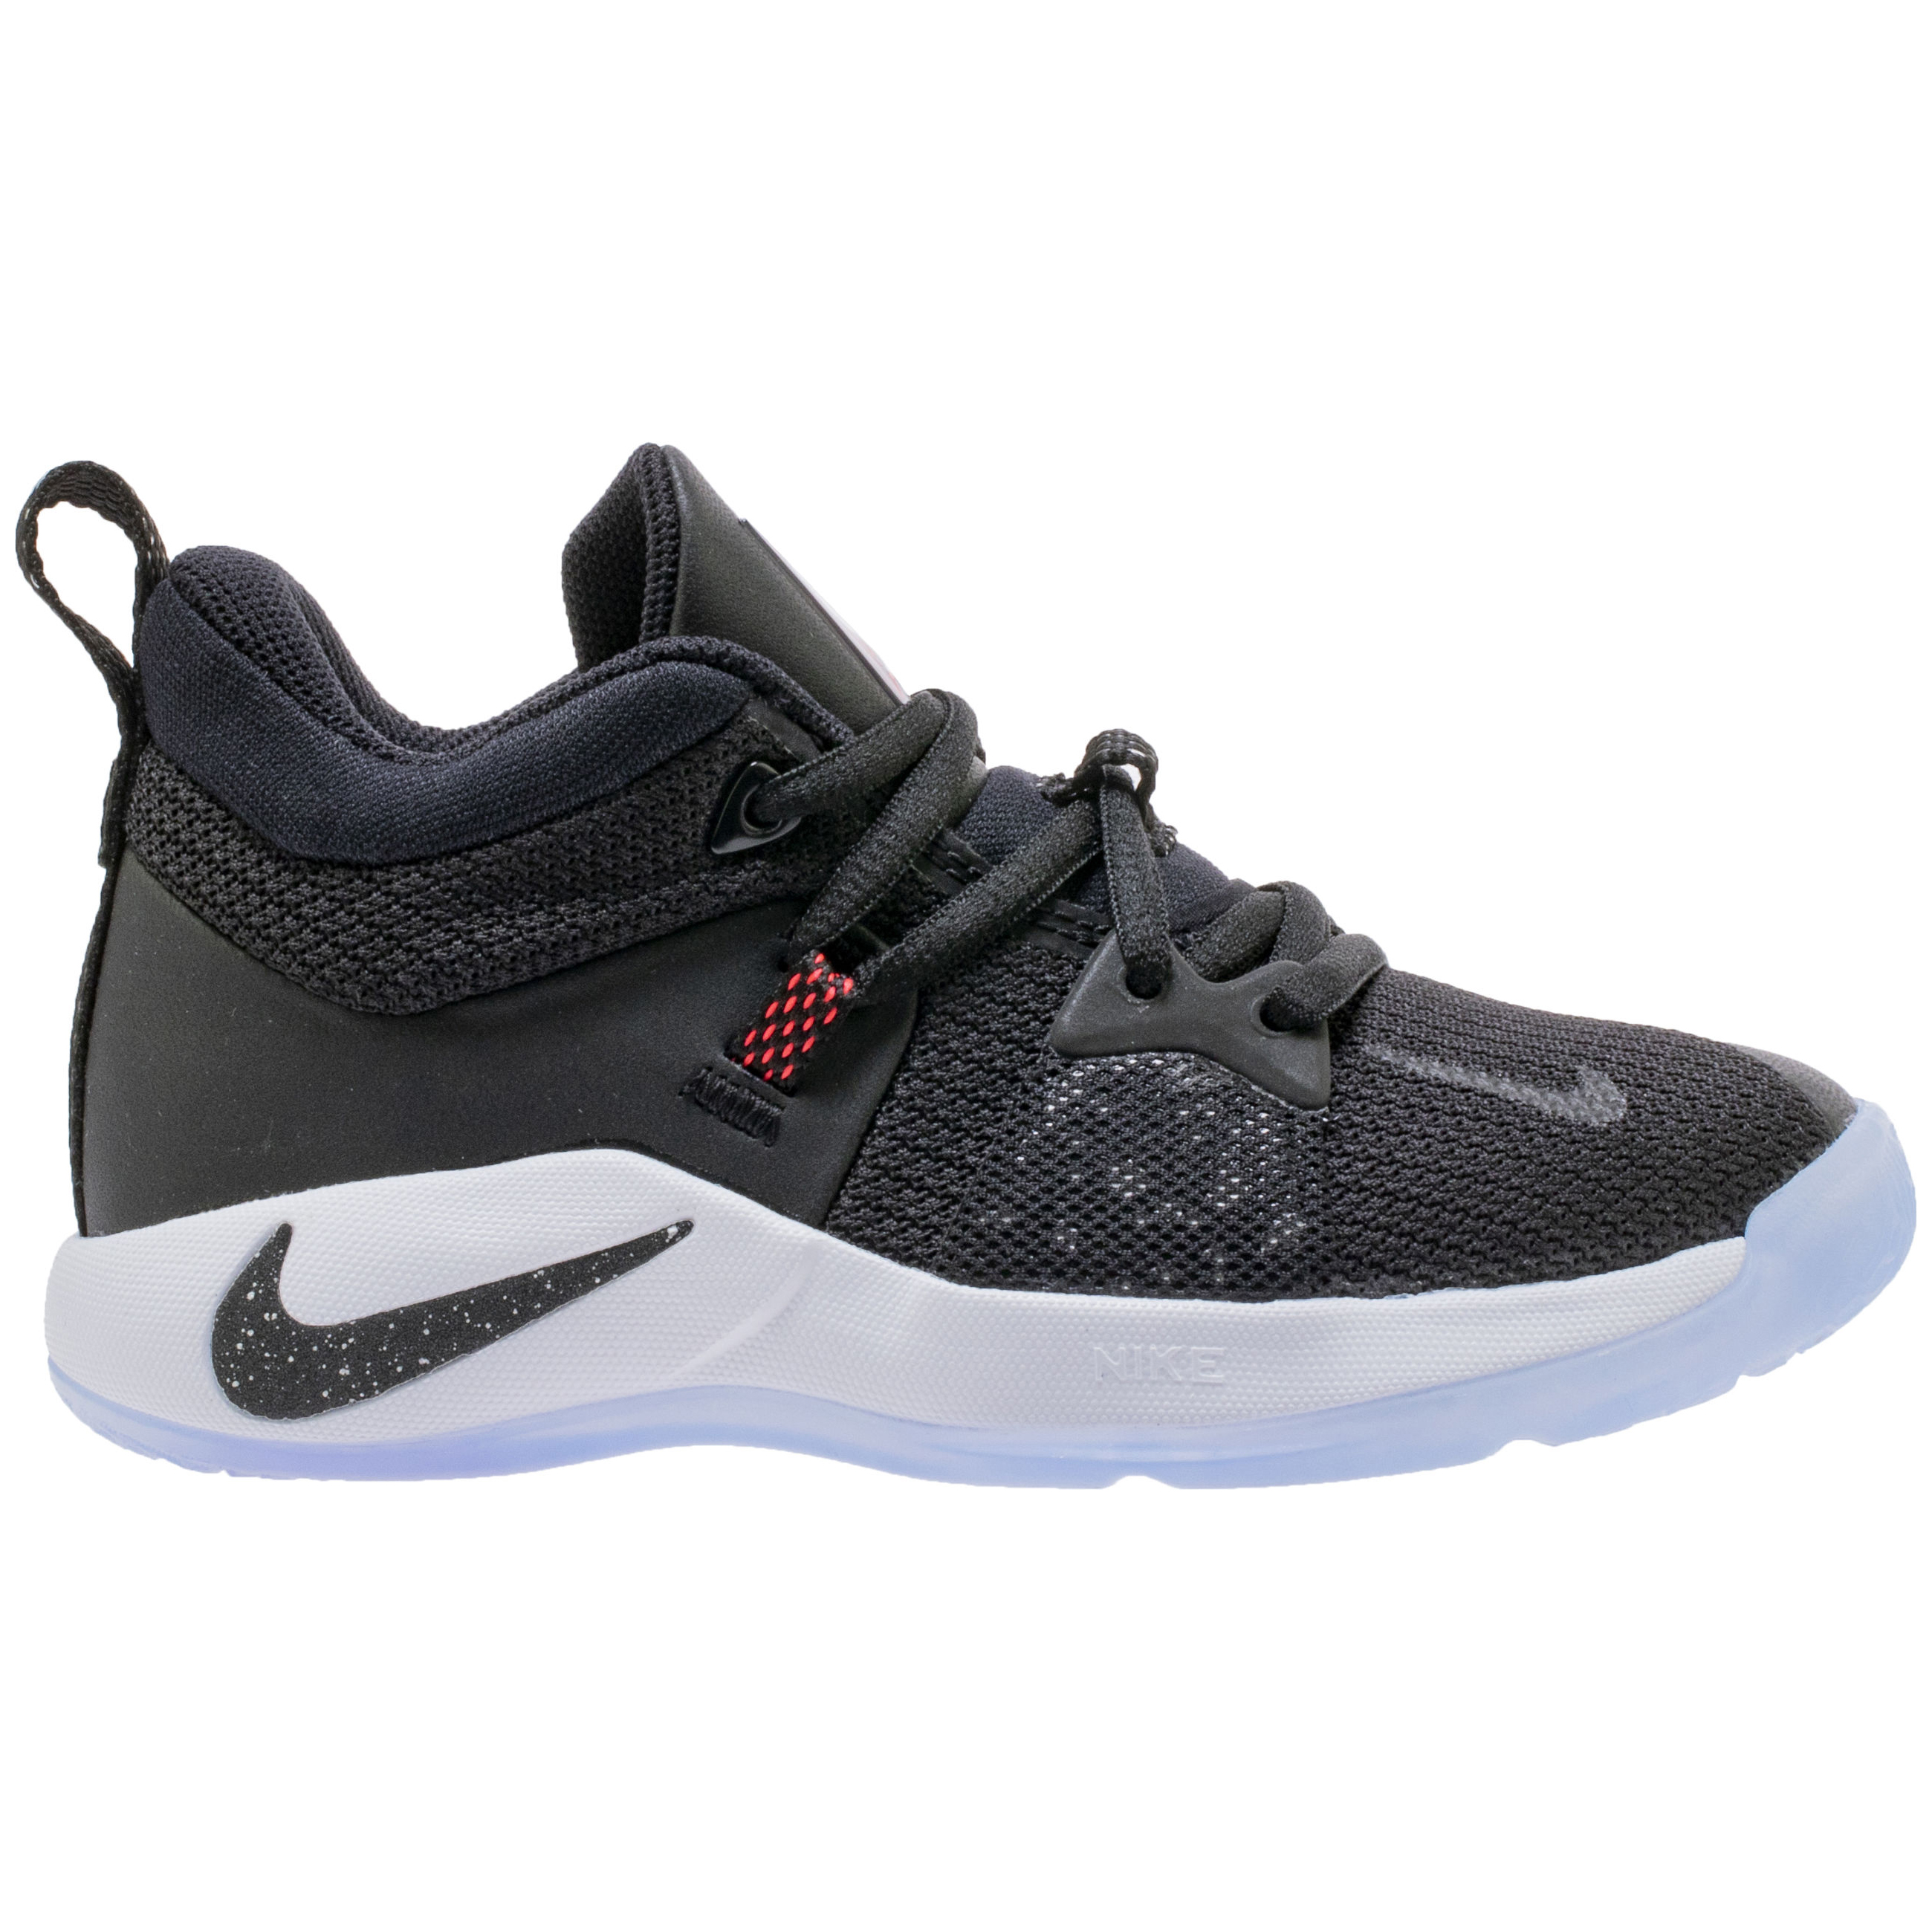 A New Nike PG 2 'Black/White/Red' with 